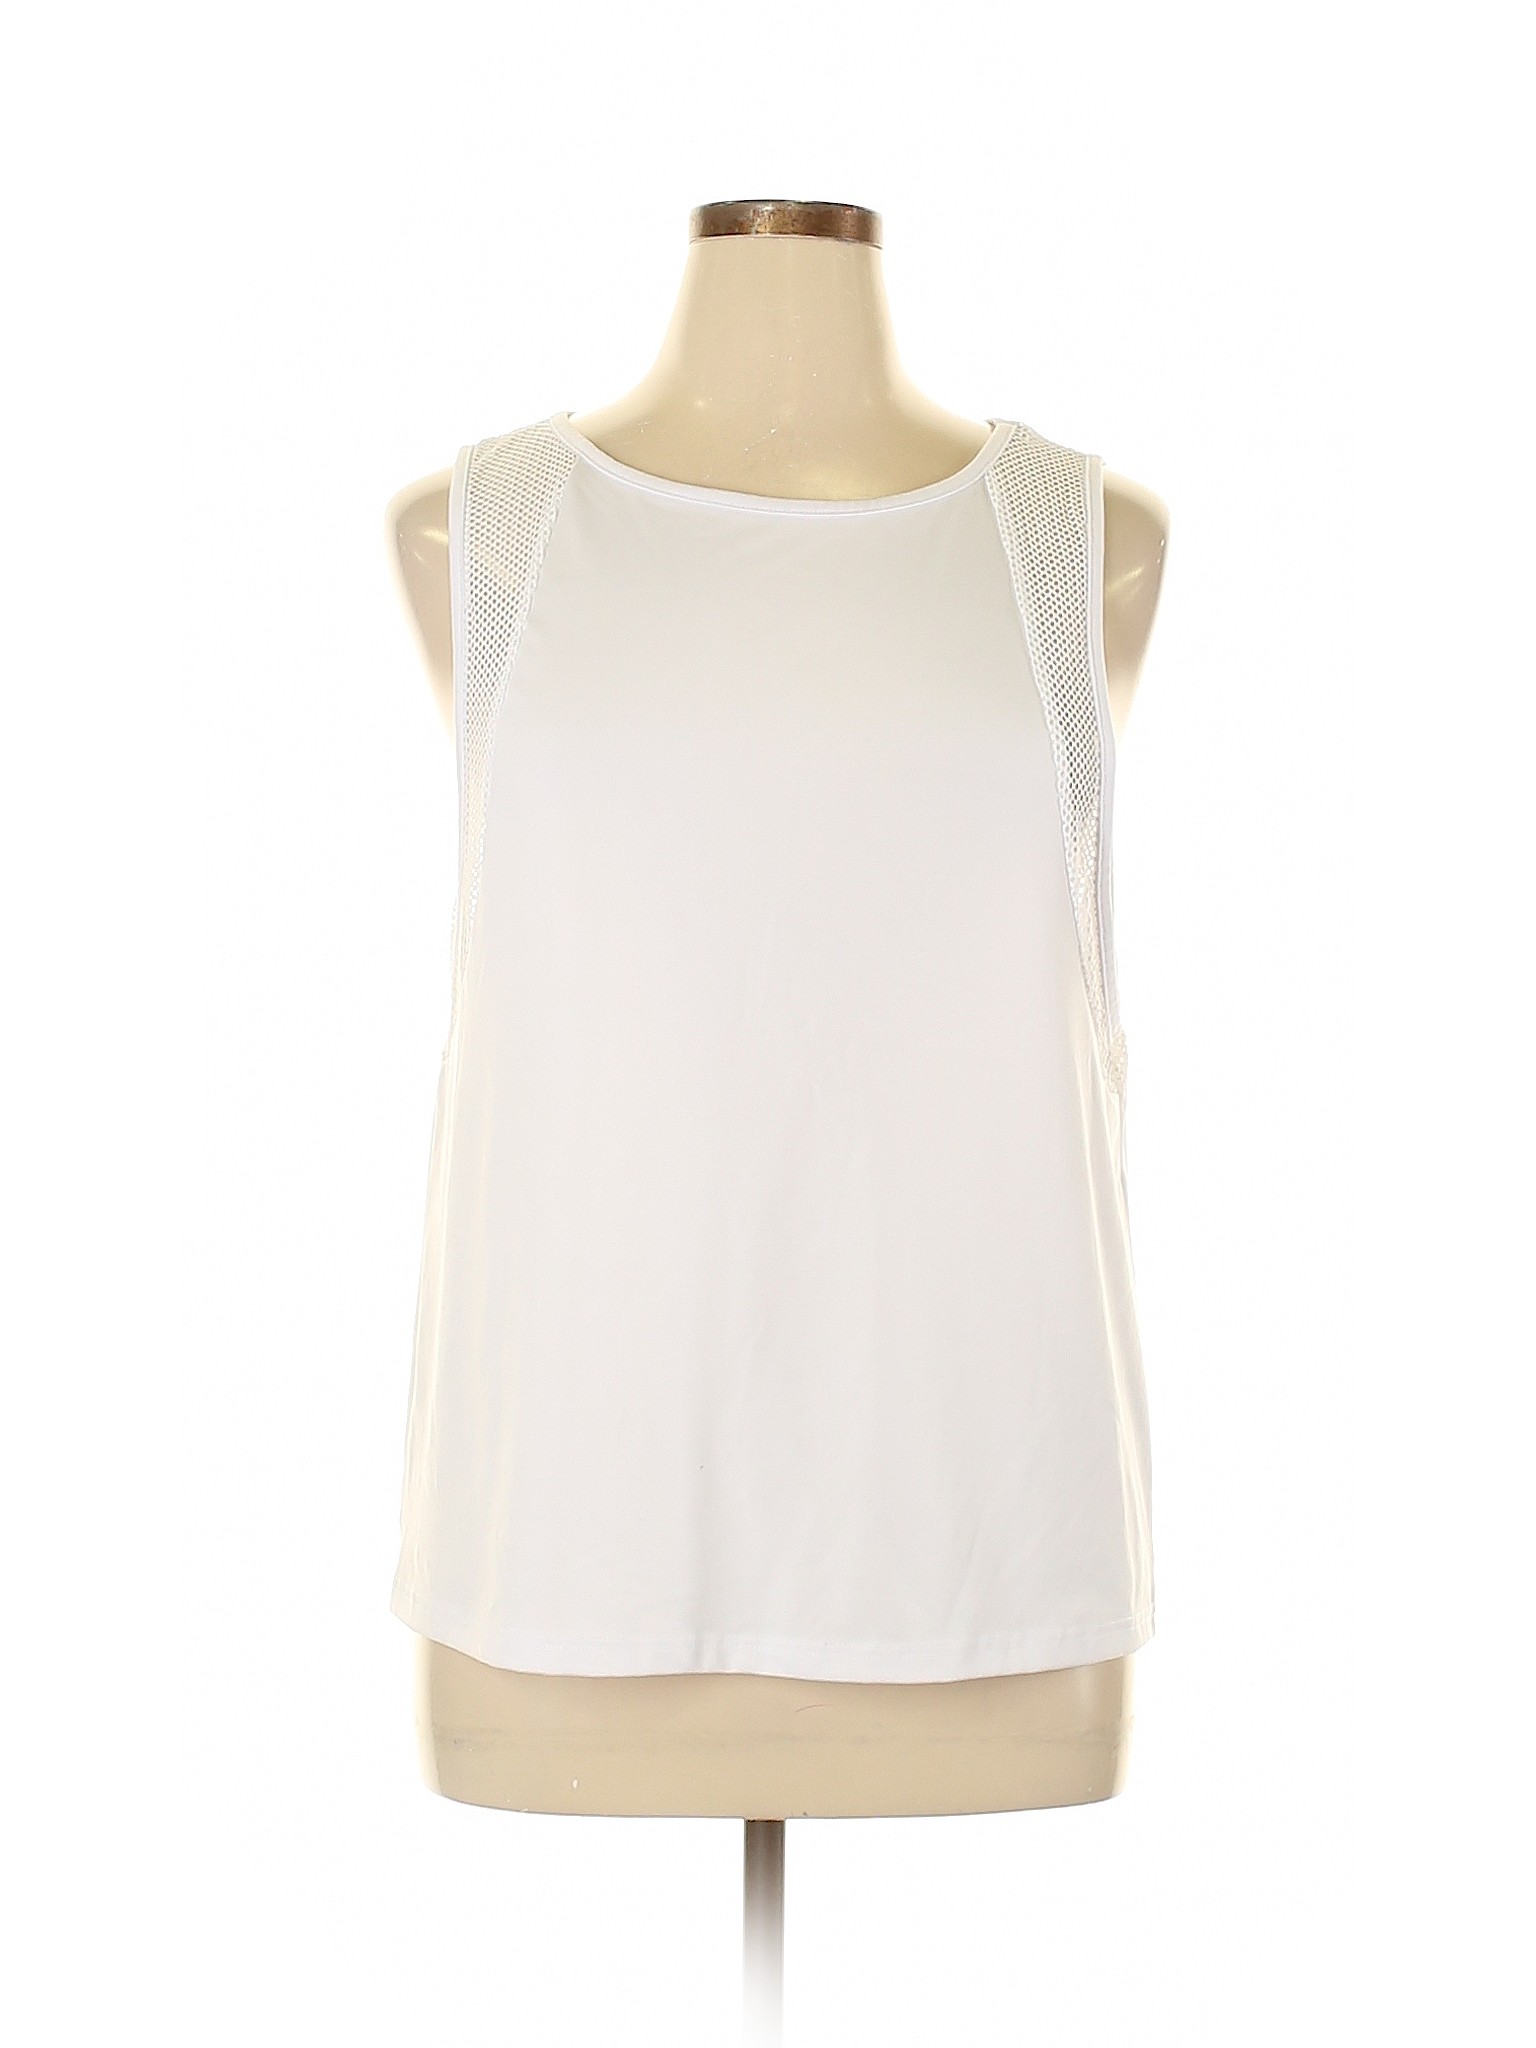 Daisy Fuentes Solid White Active Tank Size XL - 55% off | thredUP